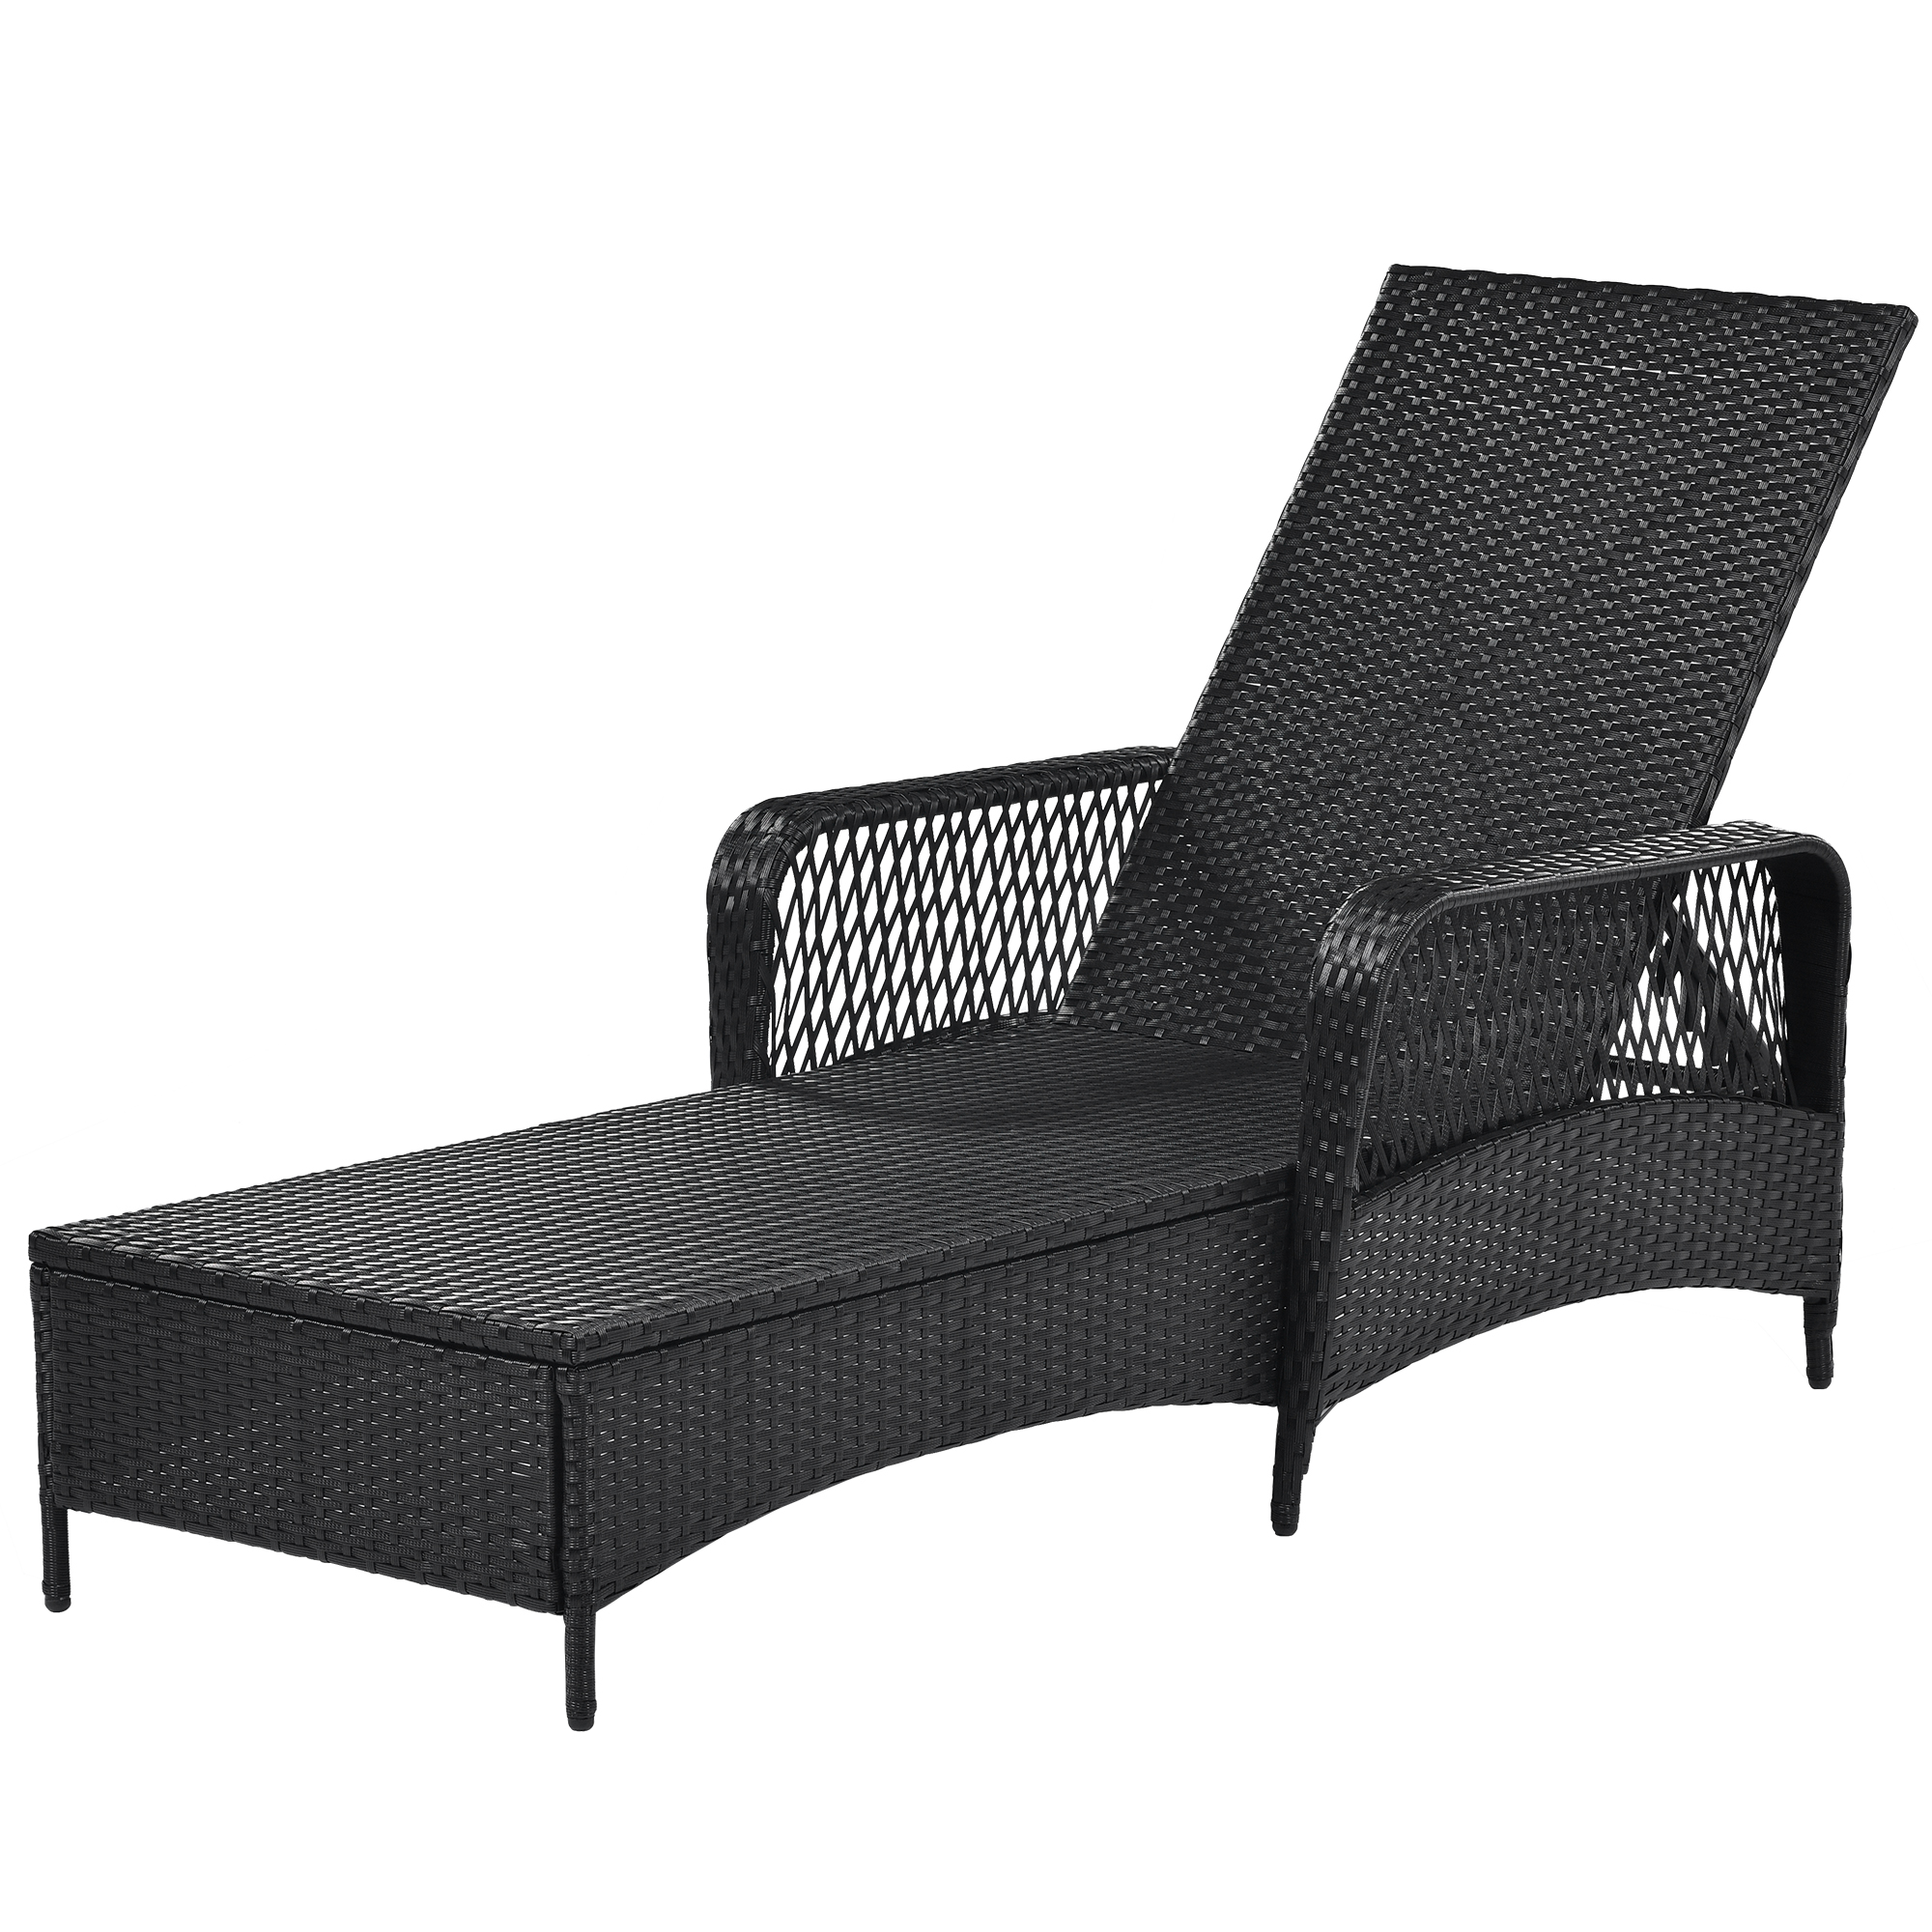 Outdoor Chaise Lounge Chair, 1 Seat Patio Chaise Lounge, White Sun Lounger, Adjustable Rattan Reclining Chair, Backrest Recliners with Cushions for Poolside Garden Deck - image 5 of 9